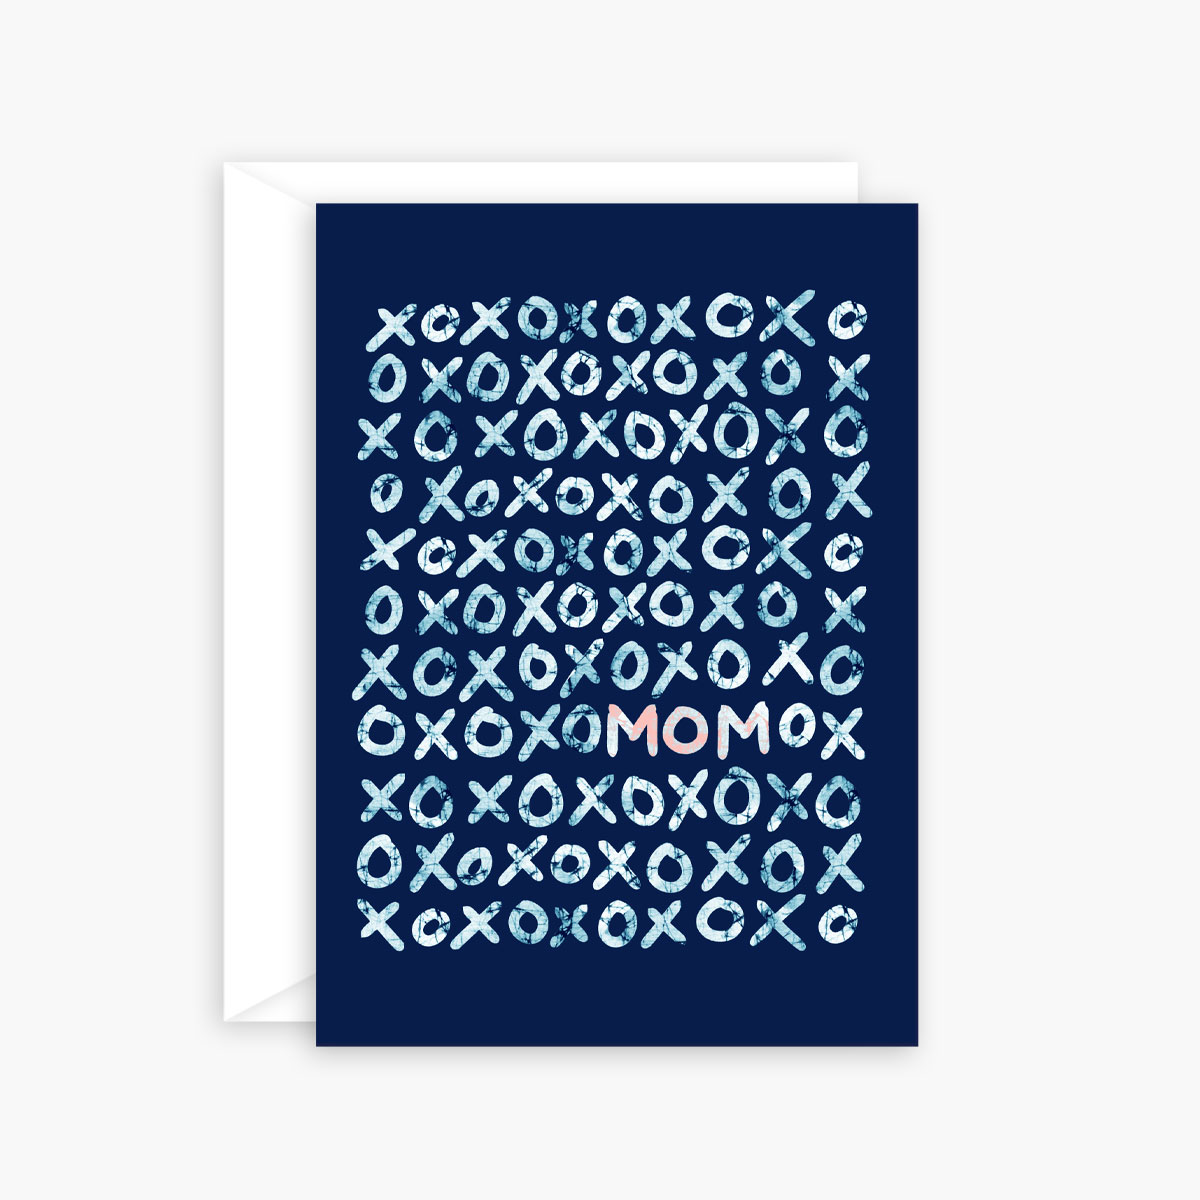 XOXO (hugs & kisses) for Mom – Mother’s Day card (blue)